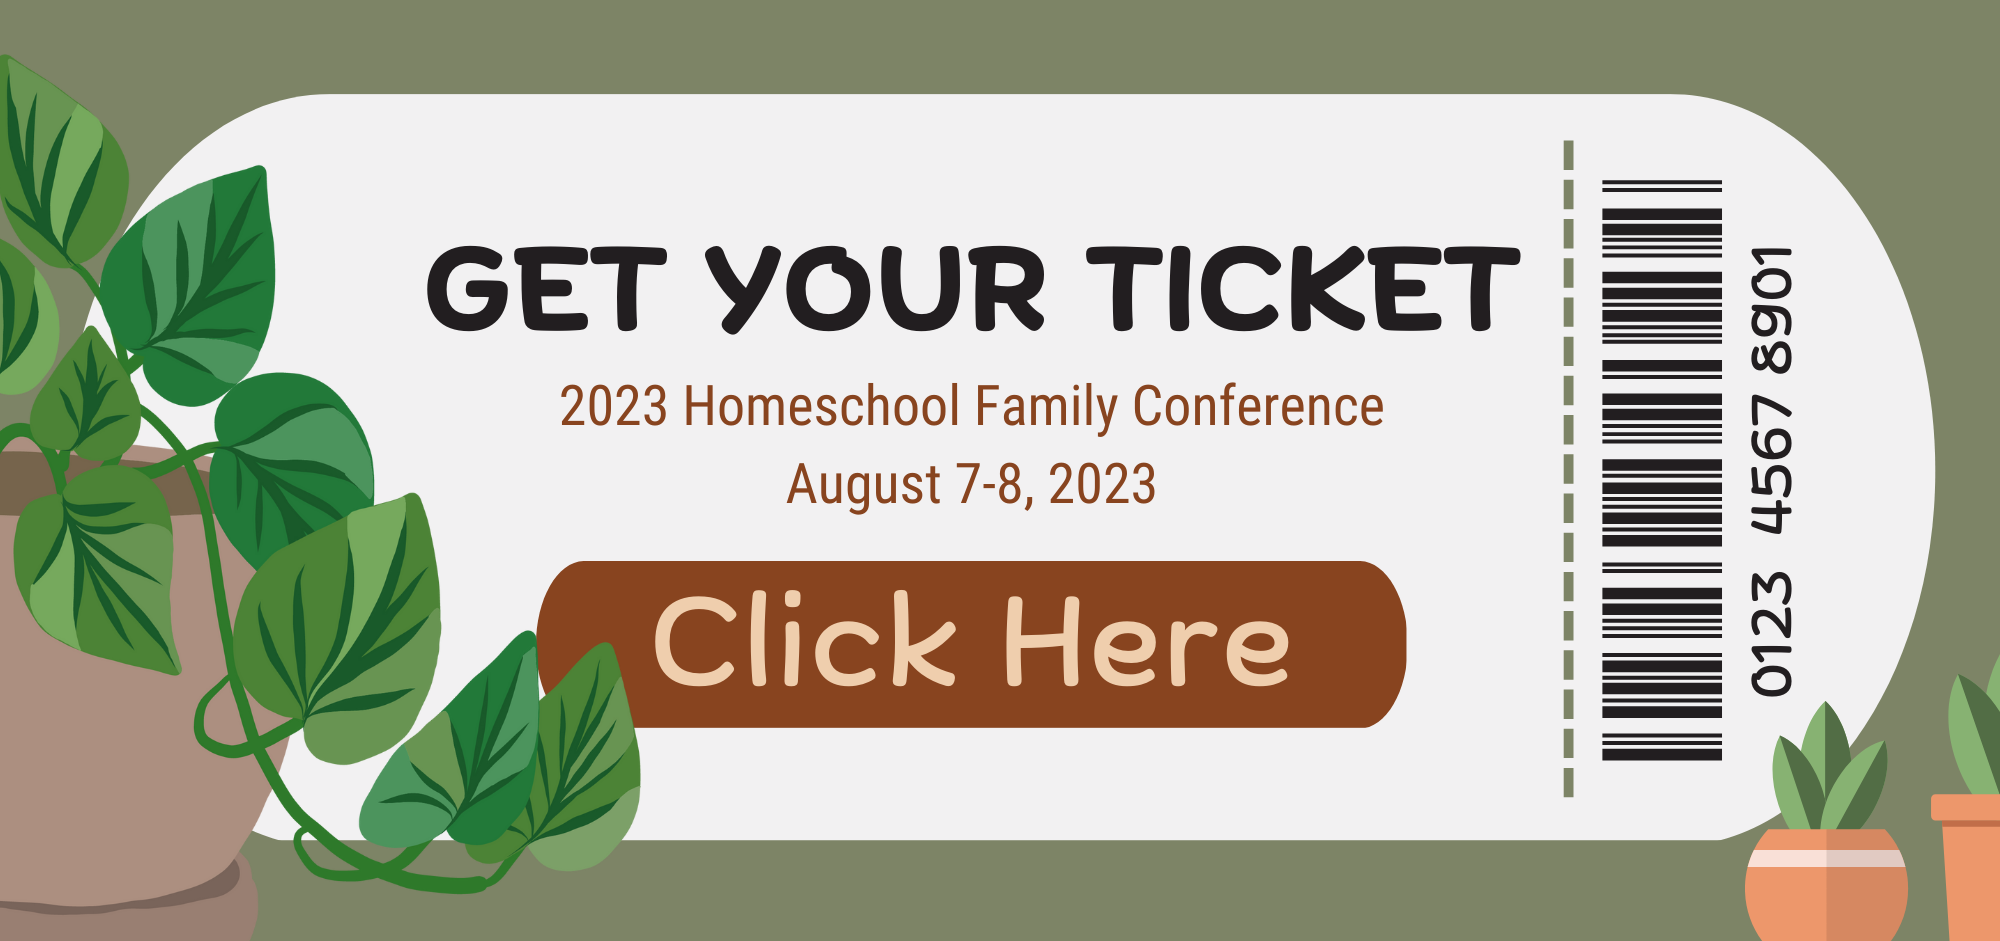 Click Here to Get Your Conference Ticket